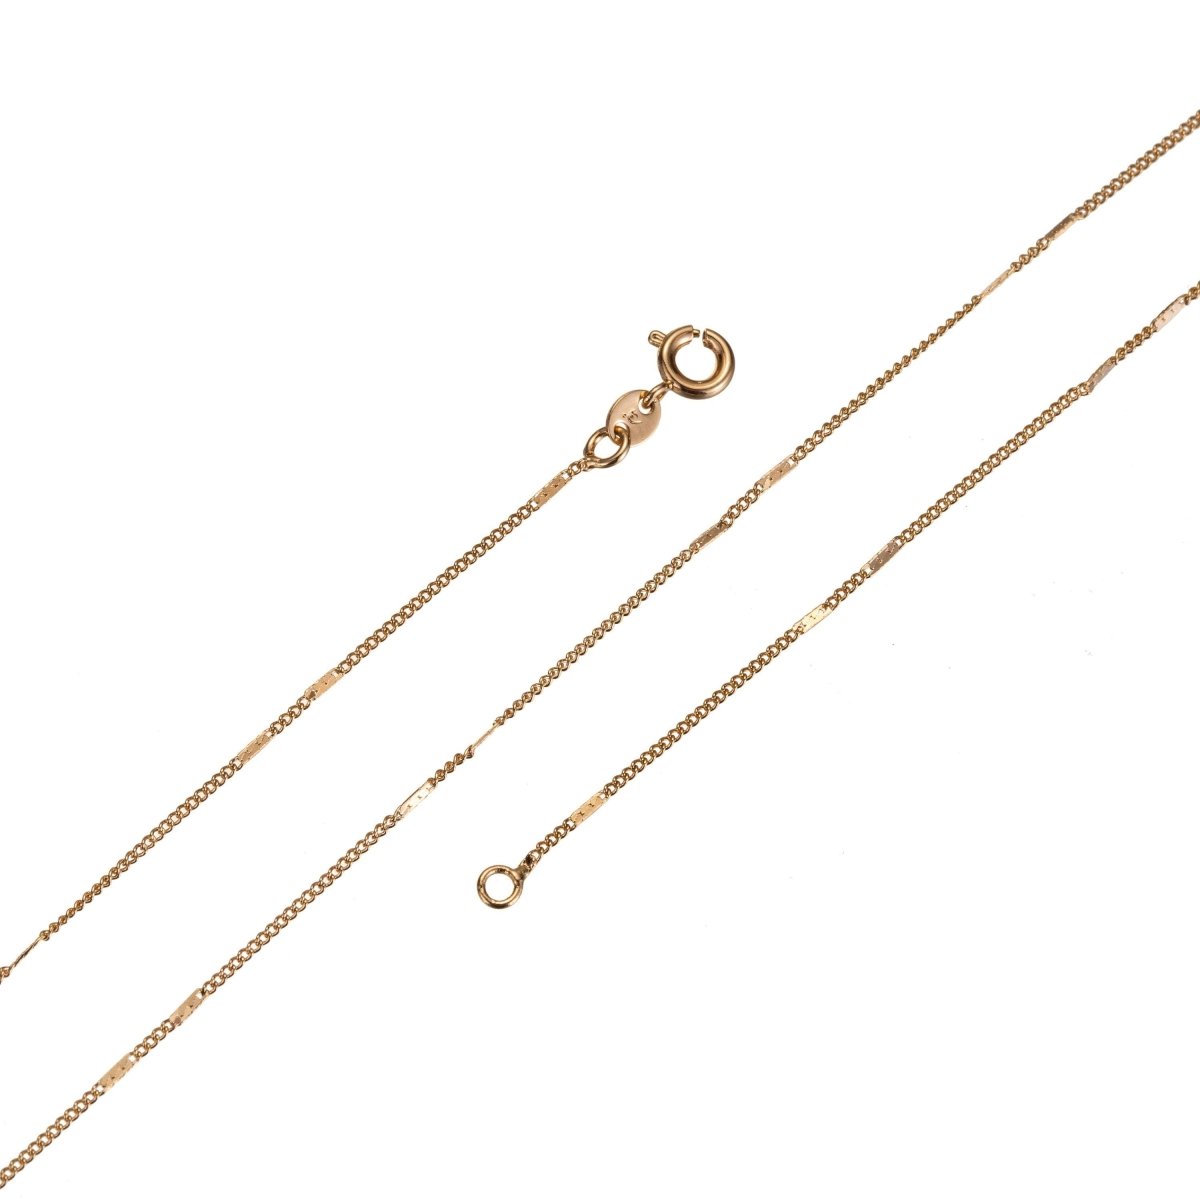 15.6'' Ready to Use 18K Gold Plated Bead Necklace Chain, Layering Beaded Chain, Dainty 1mm Bead Necklace w/Spring Ring | CN-656 Clearance Pricing - DLUXCA